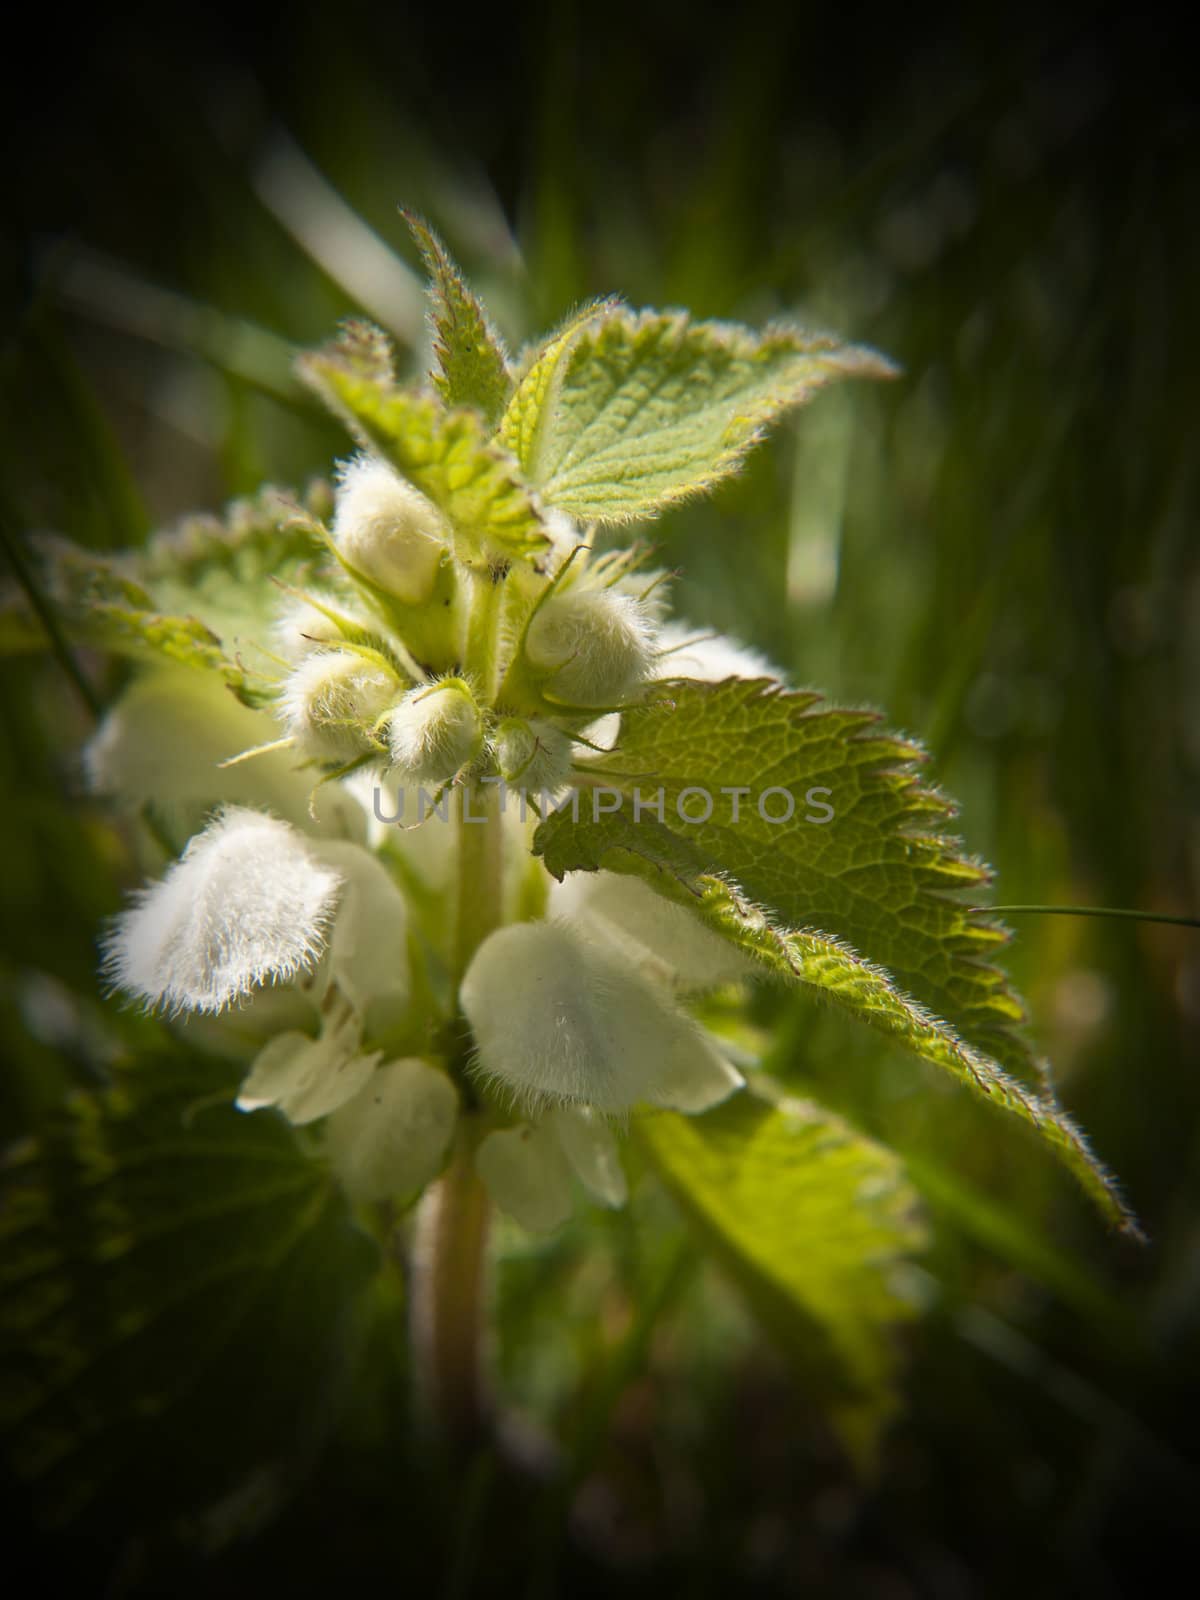 It might sting if touched but the white dead nettle is a beautiful wild flower none the less